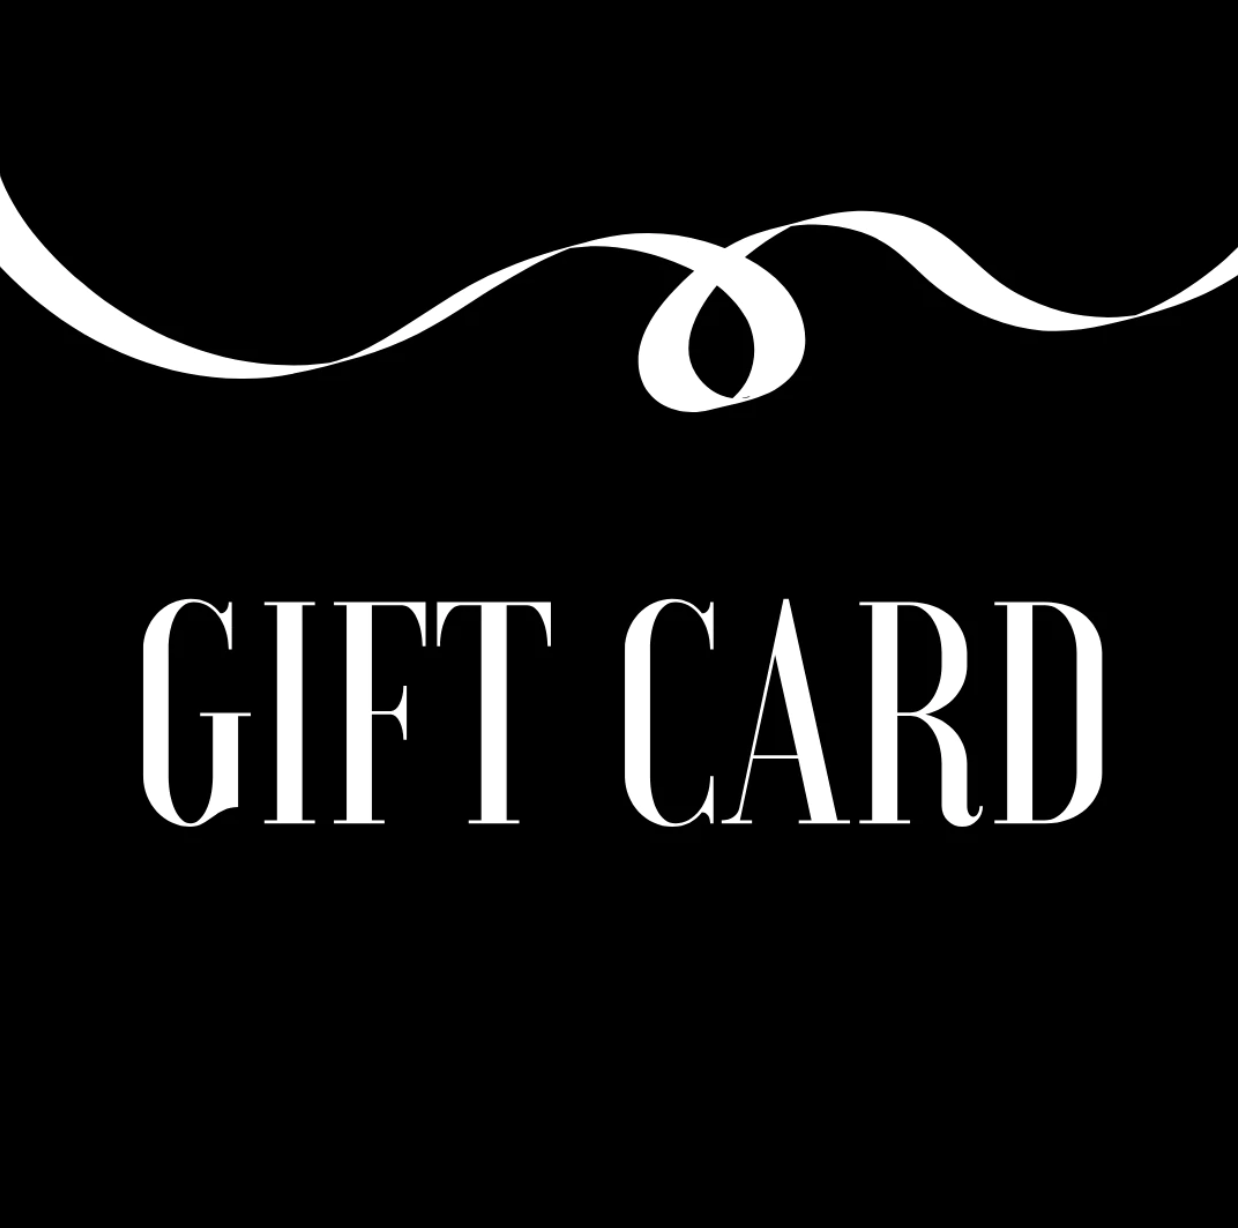 Hollywood Bound Actors - Gift Card